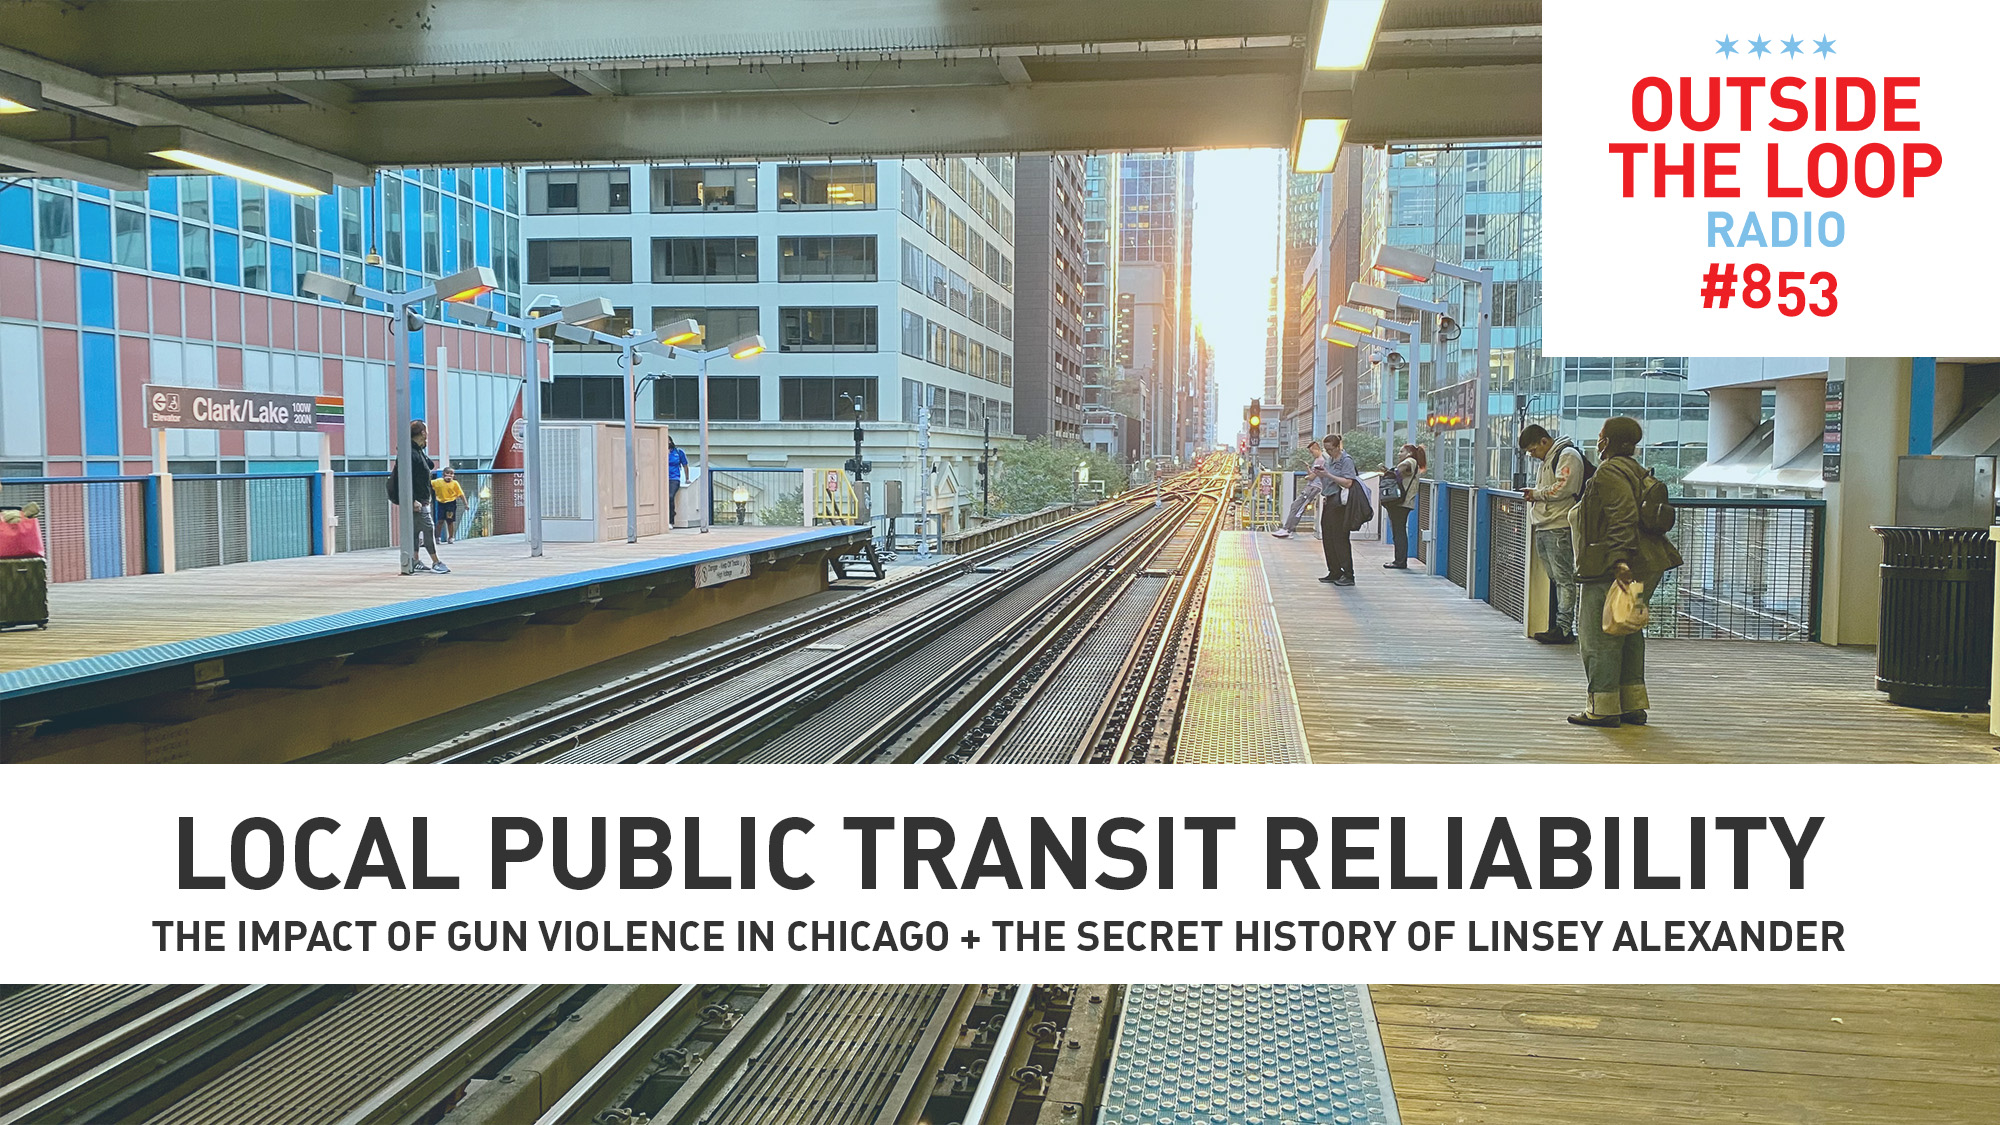 Open data allows us to track public transit. (Photo credit: Mike Stephen/WGN Radio)